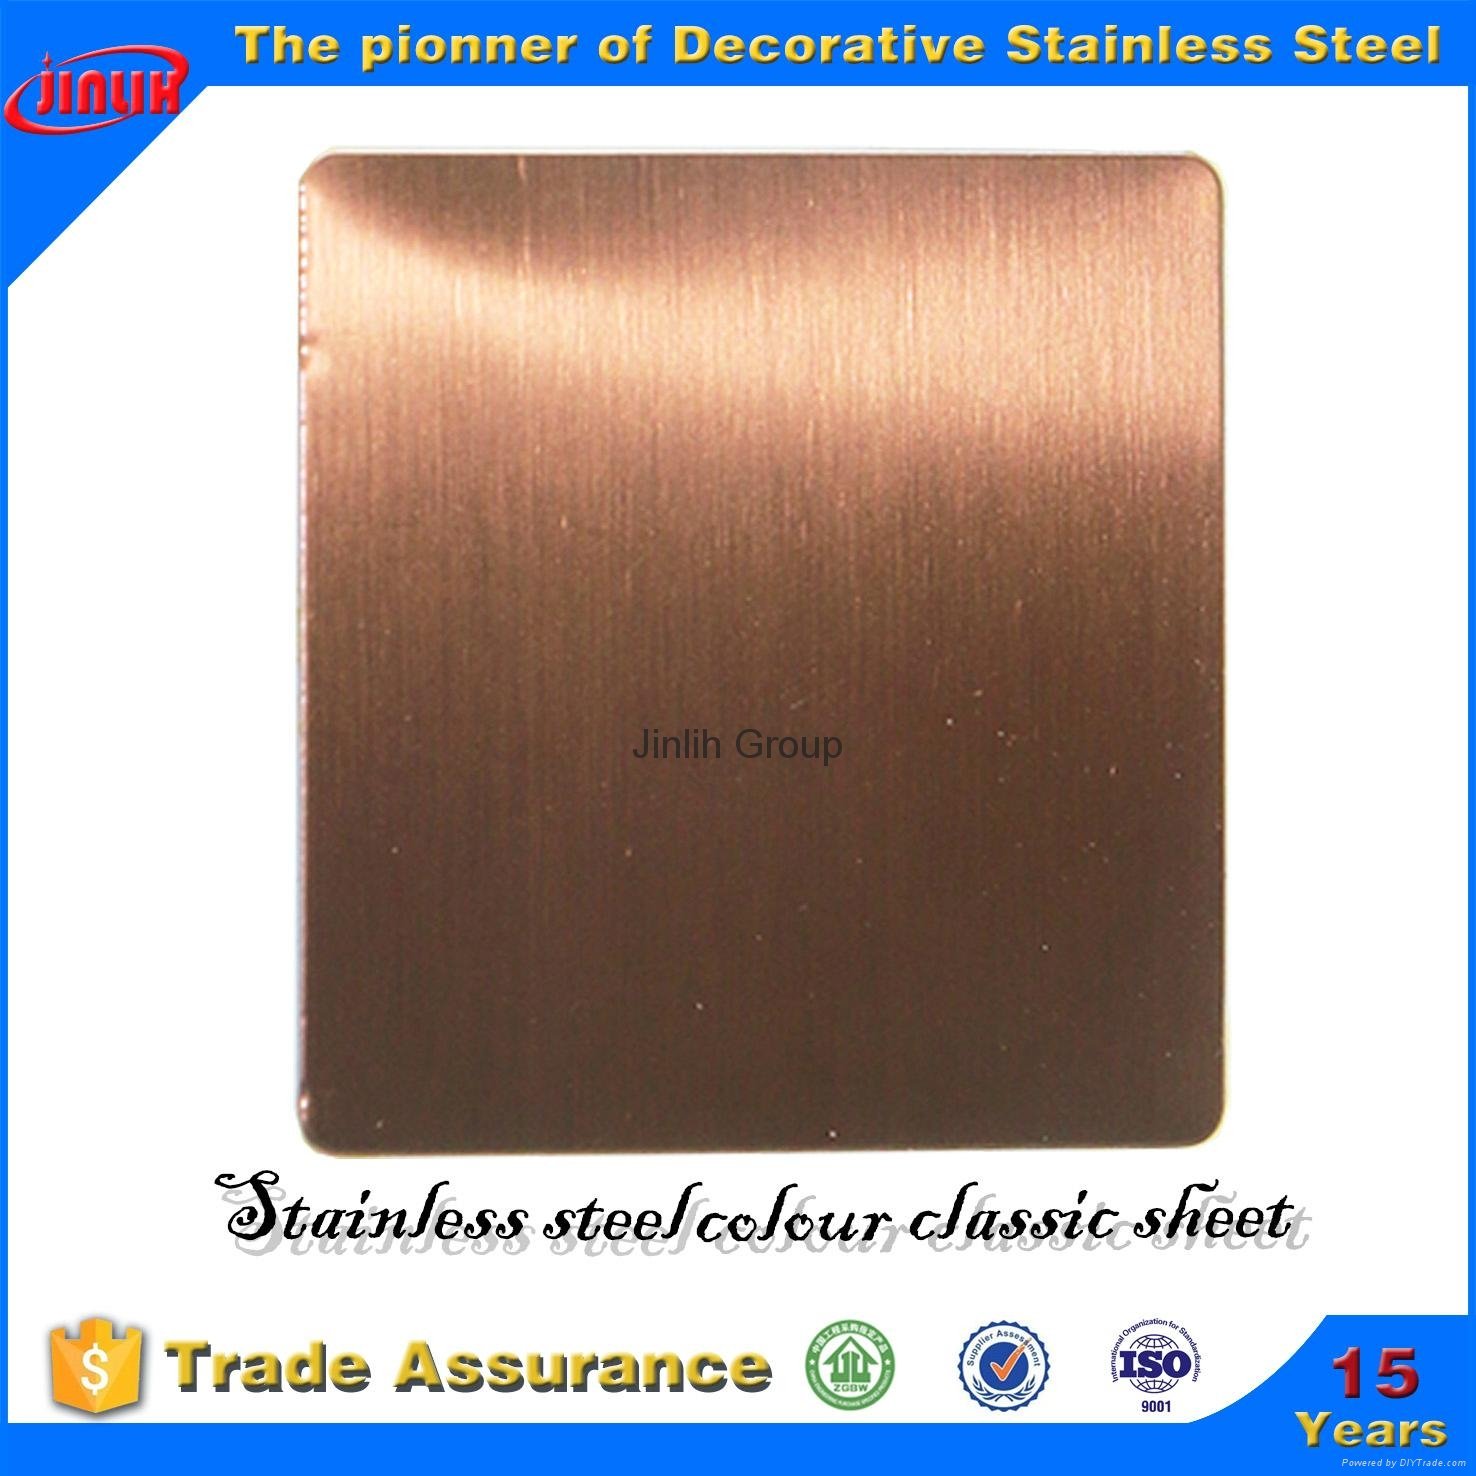 ss304 decorative stainless steel sheet 2